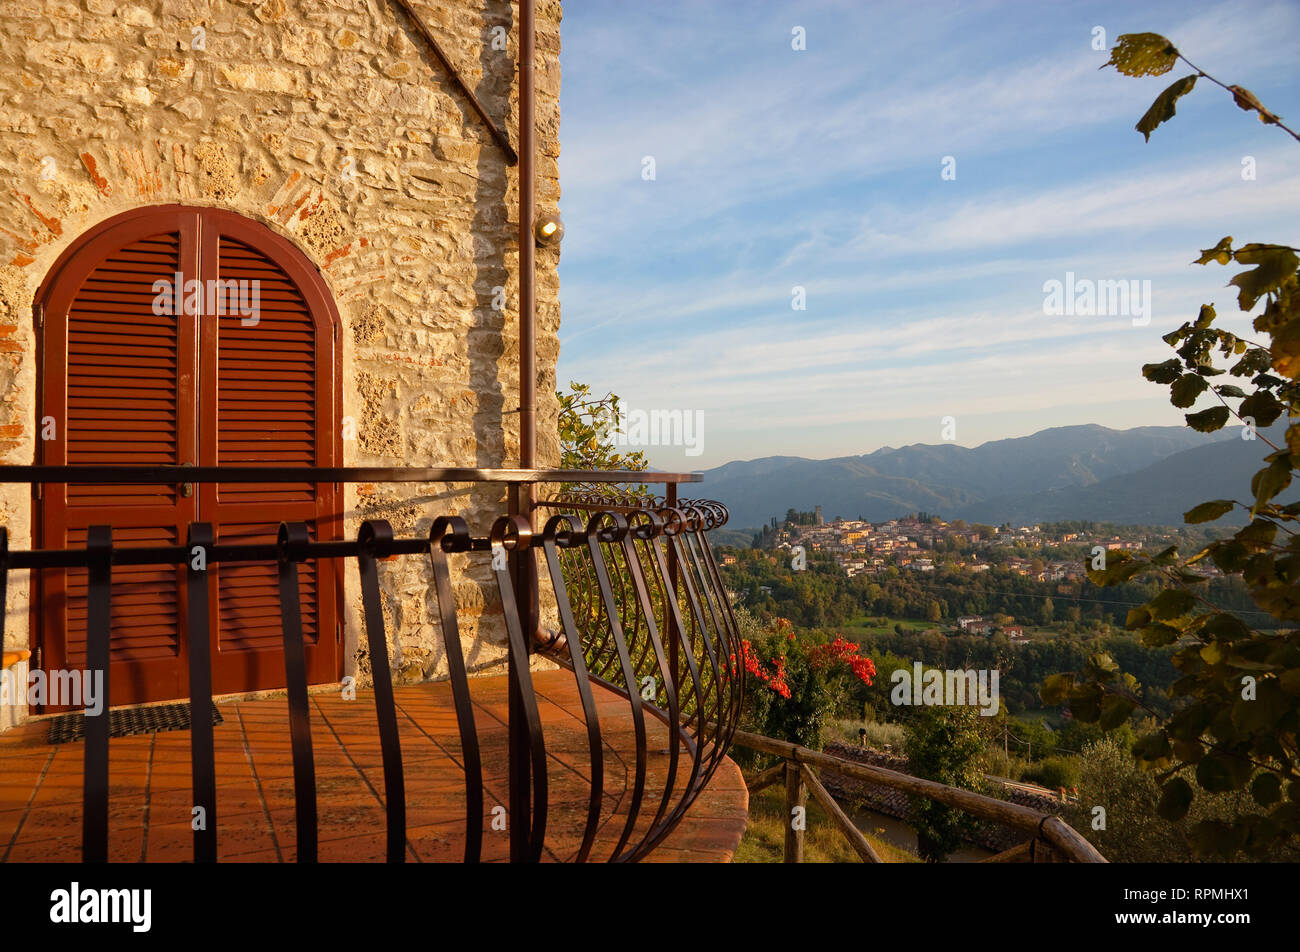 Italy, Tuscany, Lucca, Barga, View across toward the historic hilltop town. Stock Photo